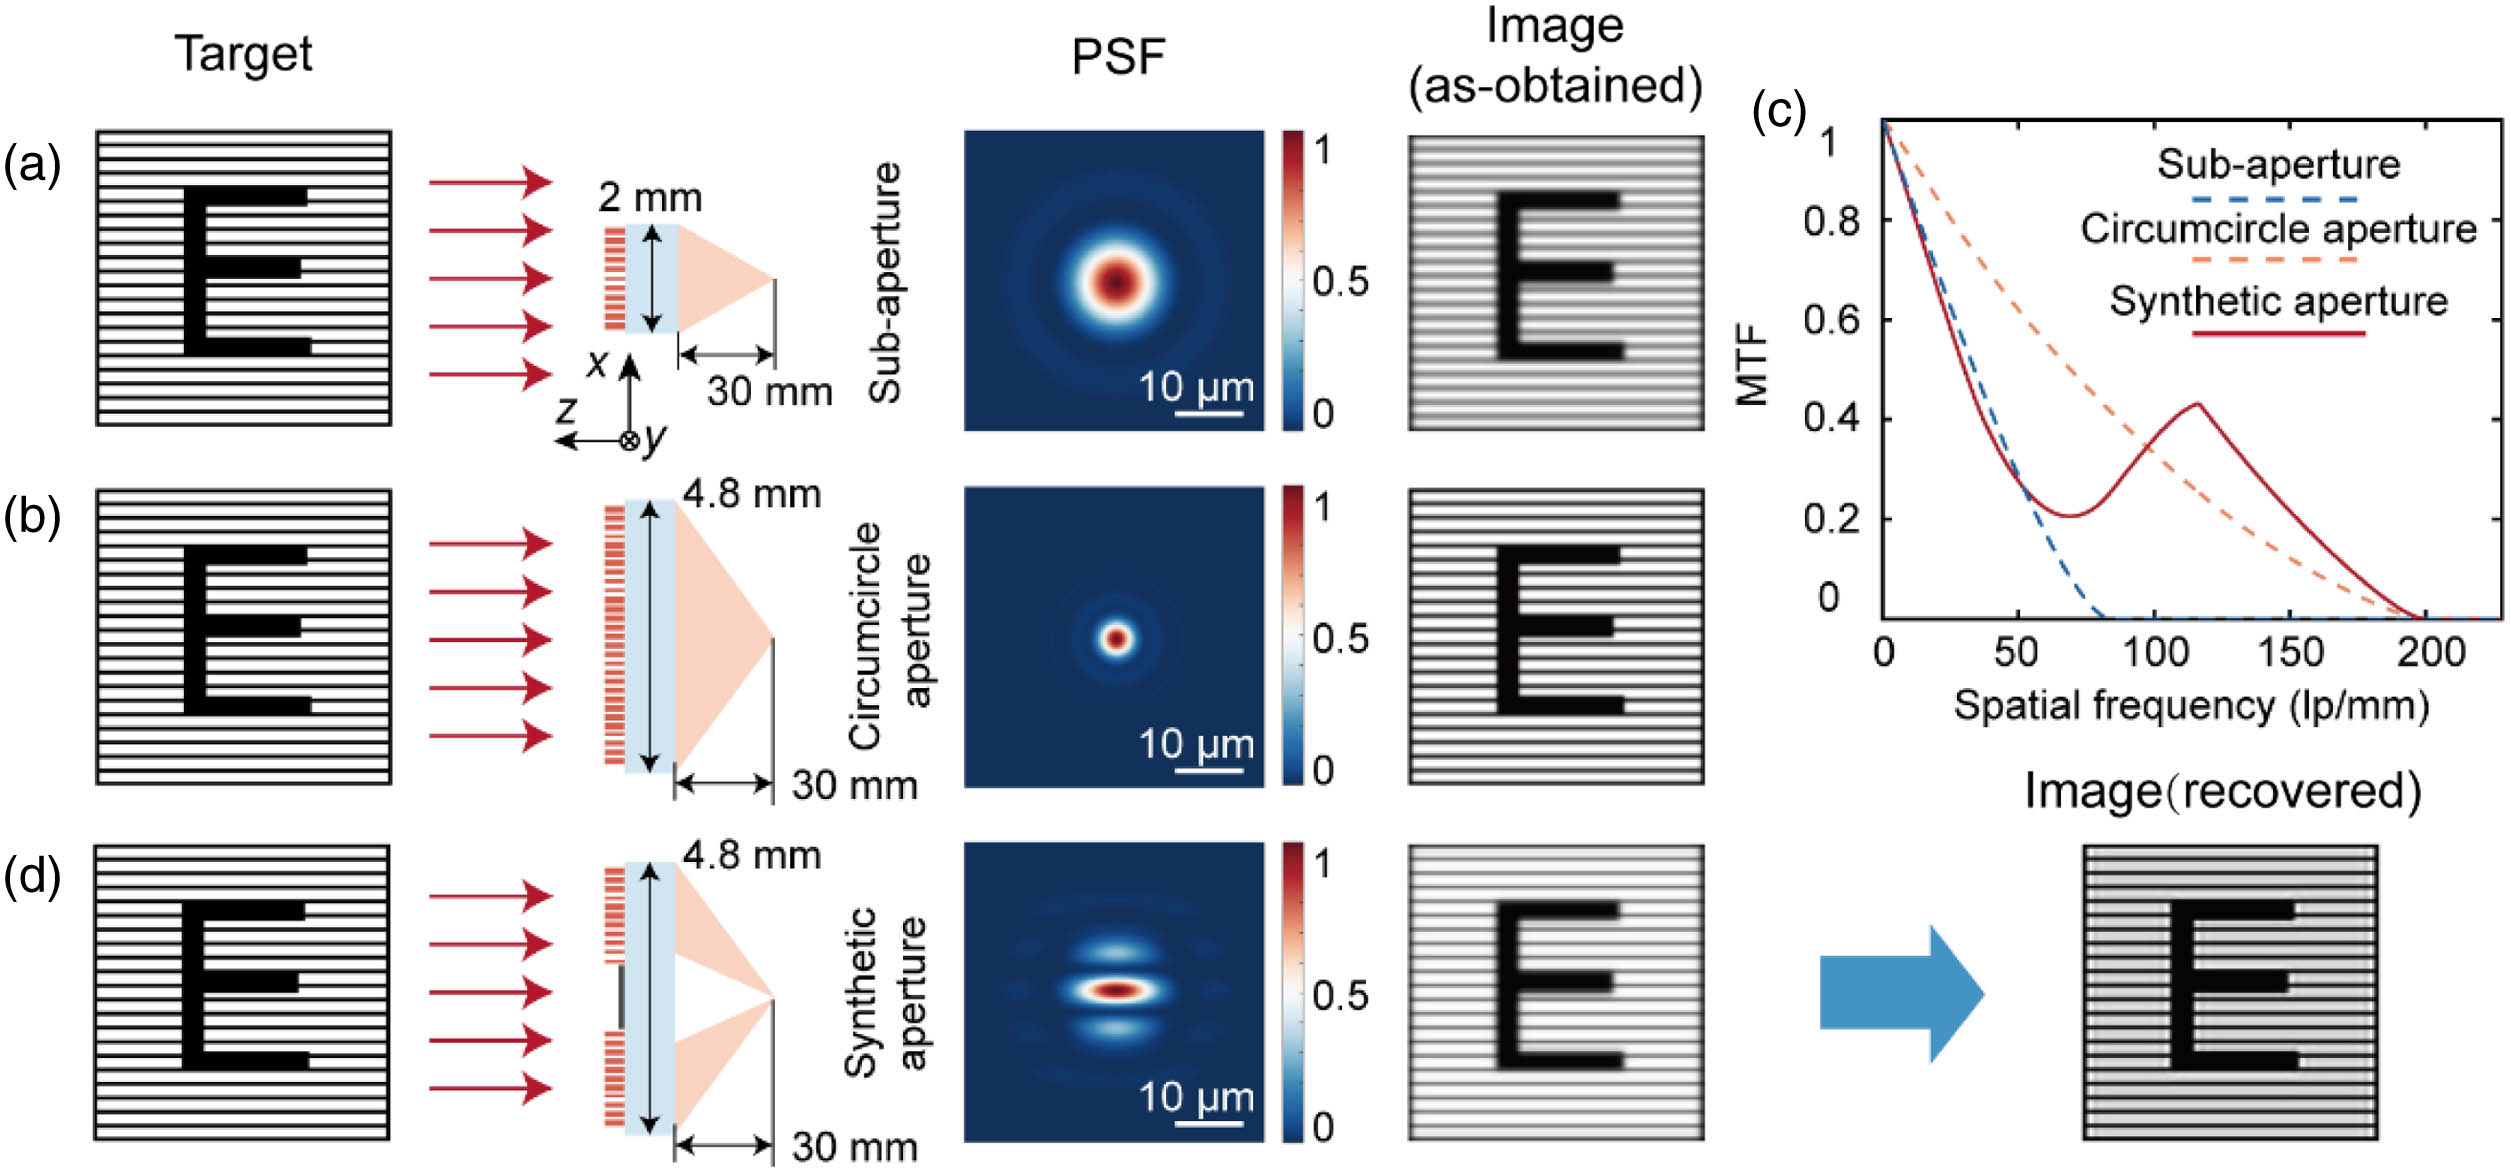 Imaging principle of a synthetic aperture metalens. (a) Schematic of imaging using a conventional subaperture metalens. The image is obtained through the convolution of the target and the PSF of the metalens. (b) Schematic of imaging using a conventional circumcircle aperture metalens. The image is obtained through the convolution of the target and the PSF of the metalens. (c) Comparison of the MTF of the subaperture metalens (blue dashed line), the circumcircle aperture metalens (orange dashed line), and the synthetic aperture metalens (red solid line); (d) schematic of imaging using a synthetic aperture metalens. The image is first obtained through the convolution of the target and the PSF of the metalens, and then recovered using the Richardson–Lucy deconvolution algorithm. The diameter of the subaperture and the circumcircle aperture is set to 2 and 4.8 mm, respectively.